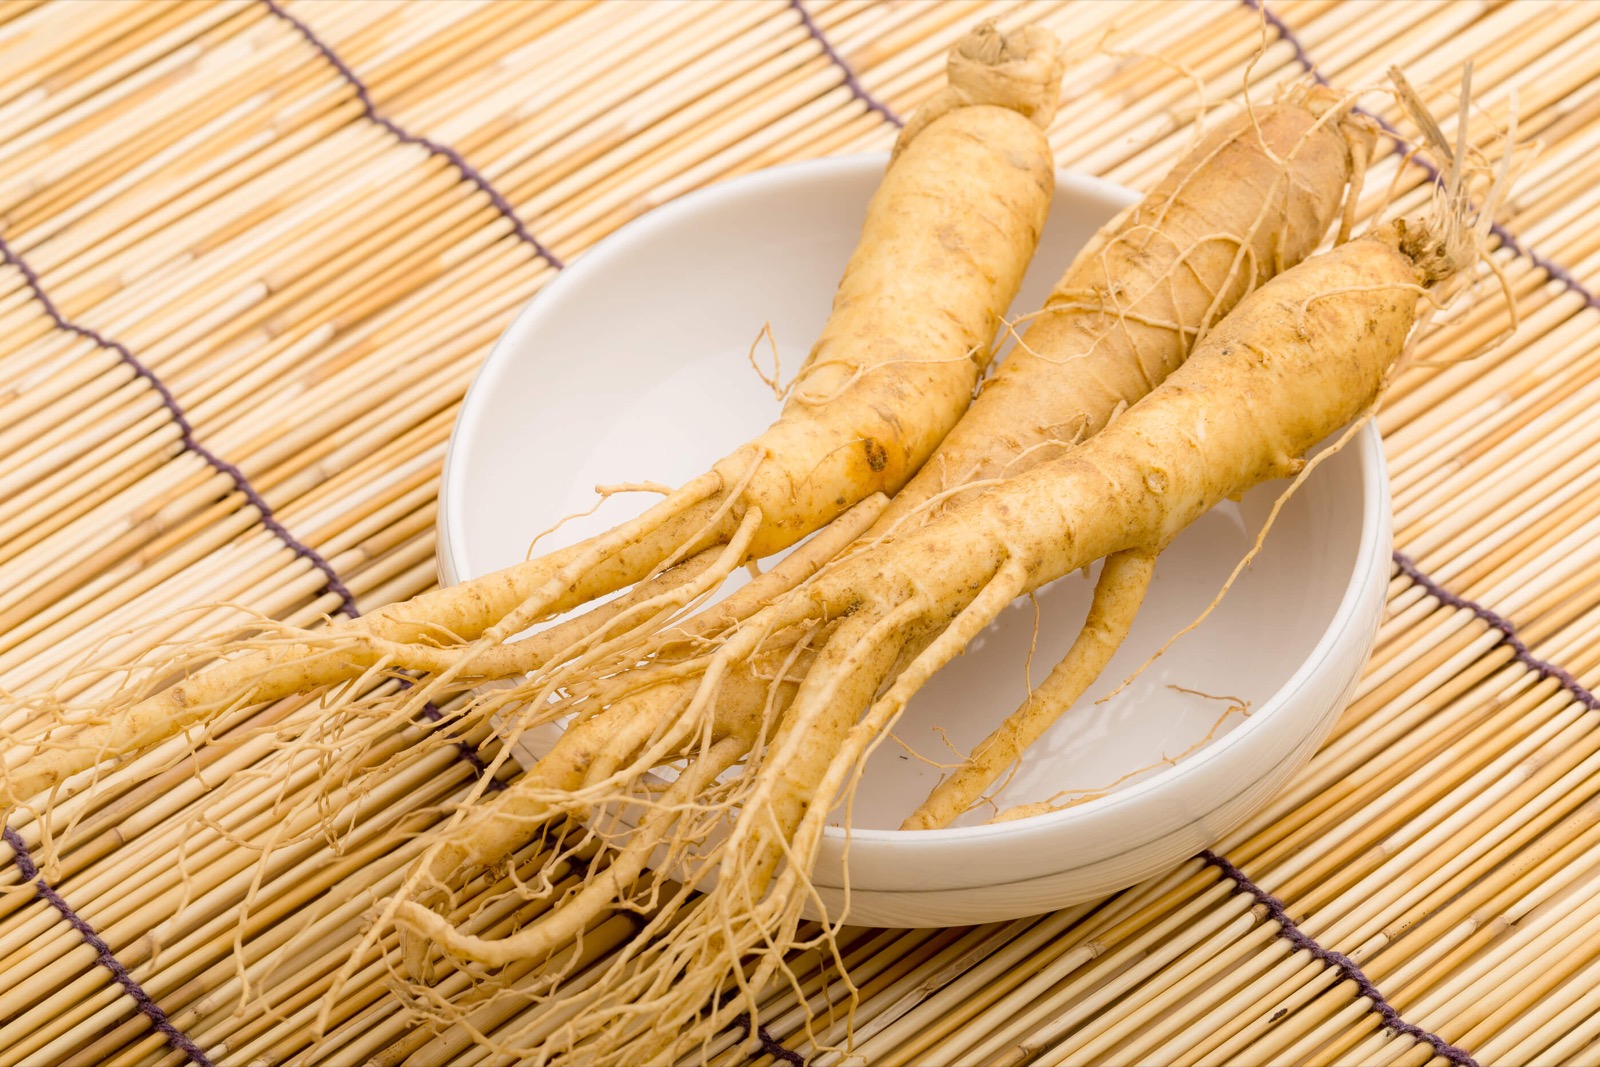 💖 If You Like Eating 27/35 of These Aphrodisiacs, You’re a 🥰 Real Romantic Korean Ginseng